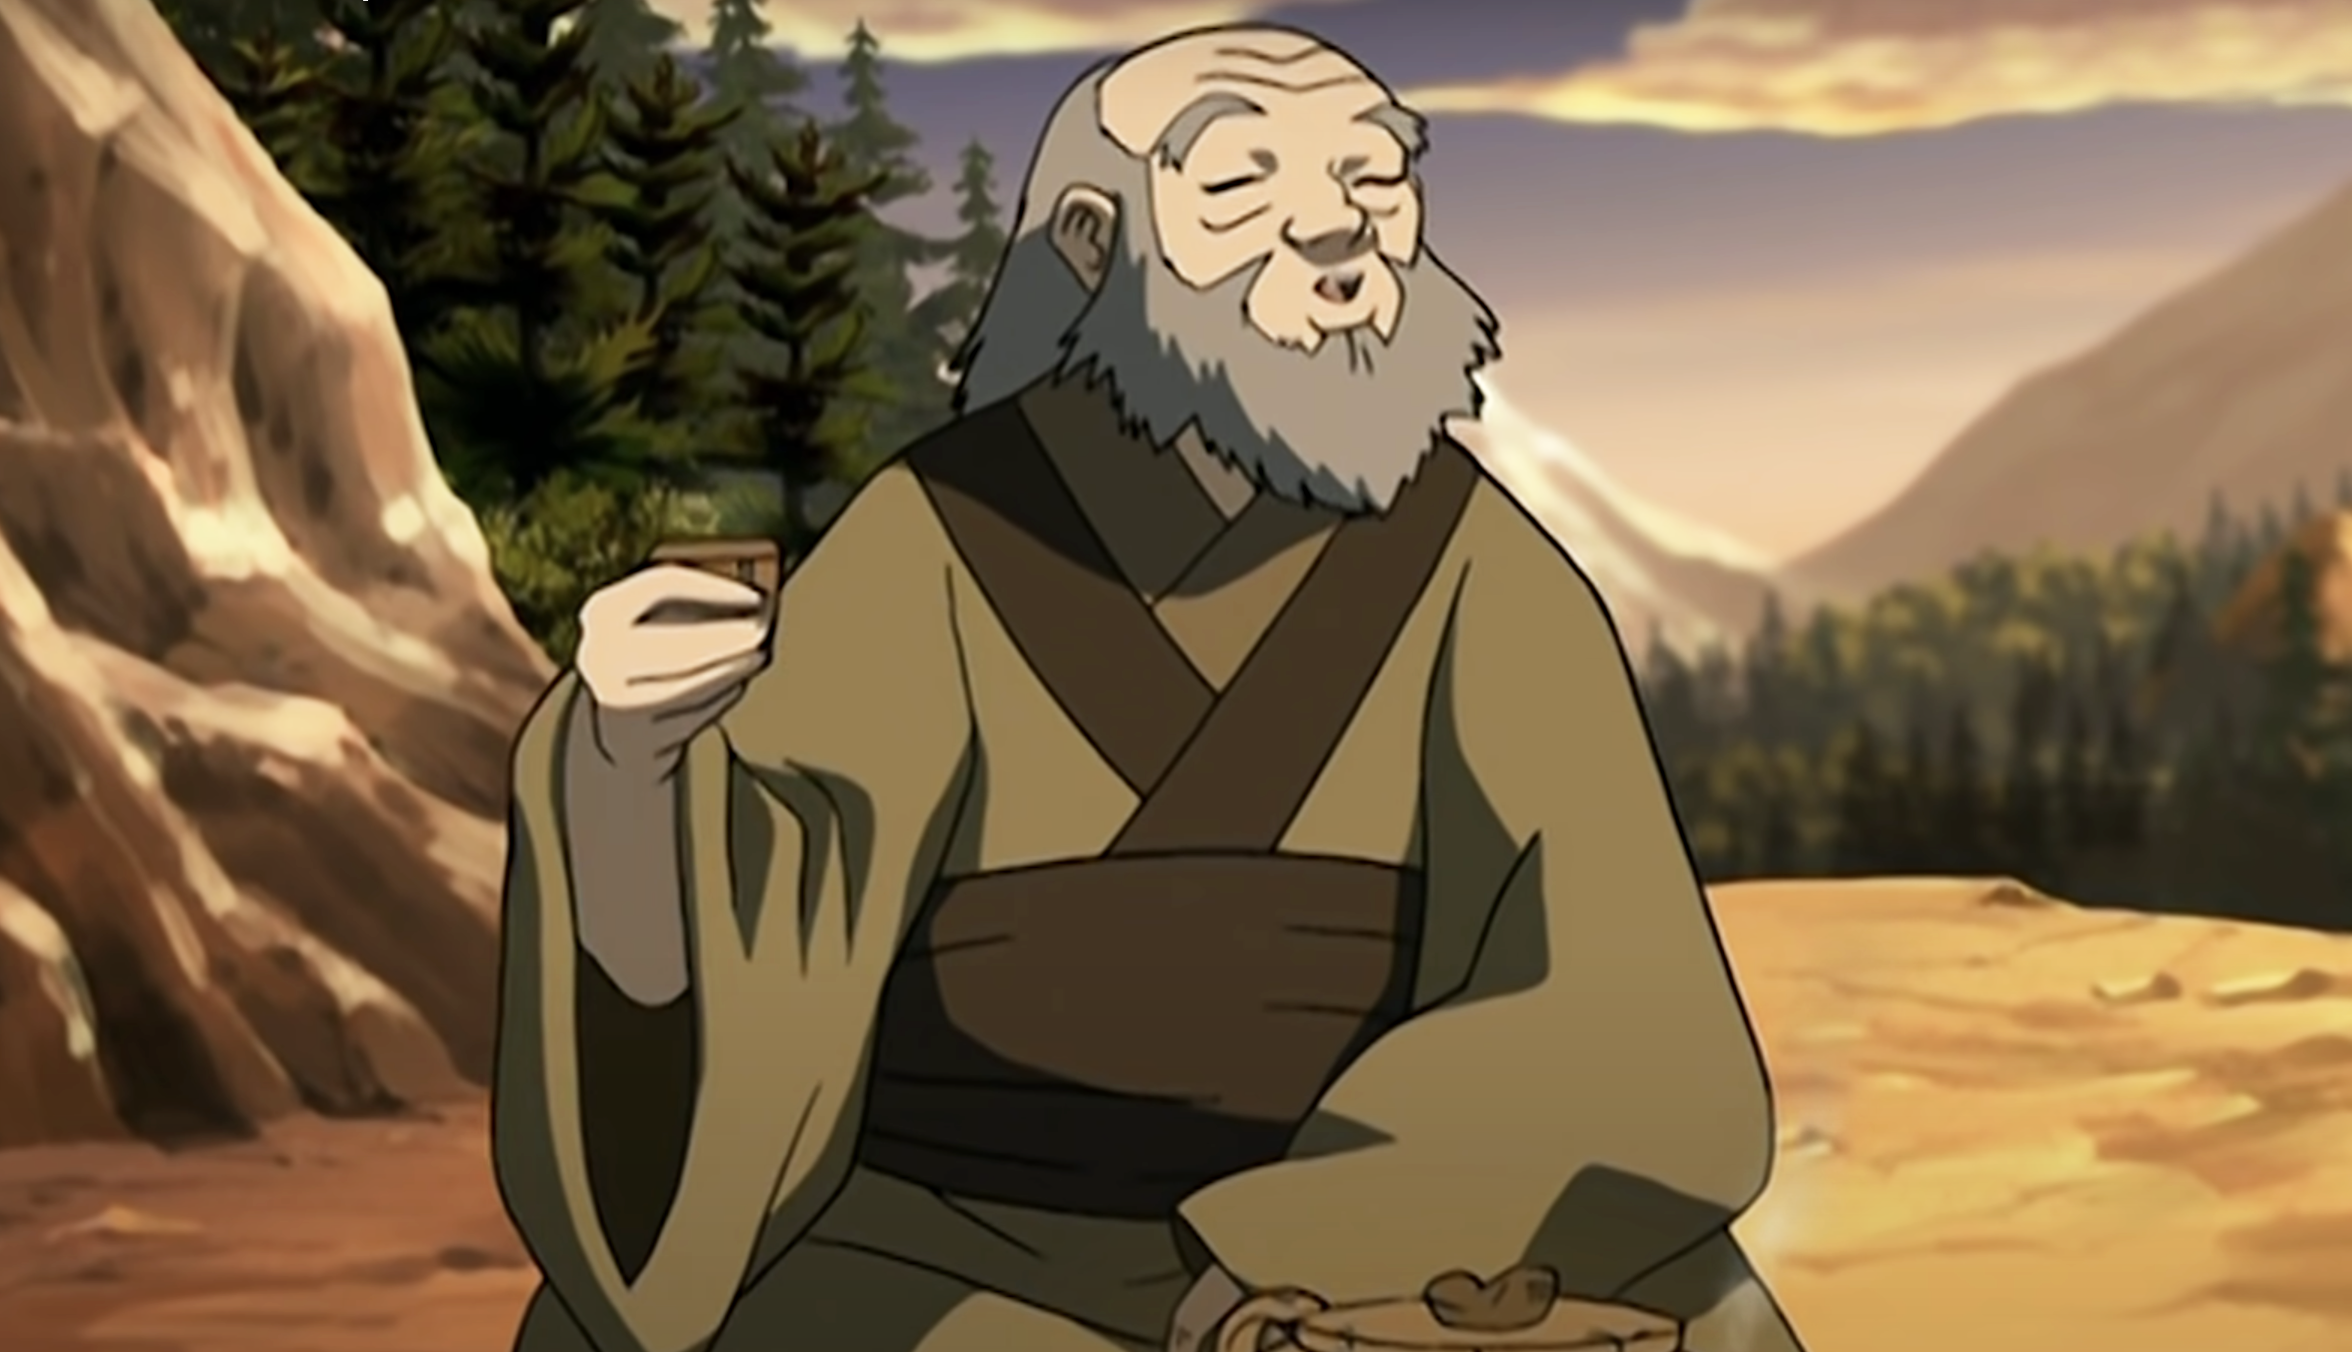 Uncle Iroh enjoying a cup of tea with Toph a mountainside. 